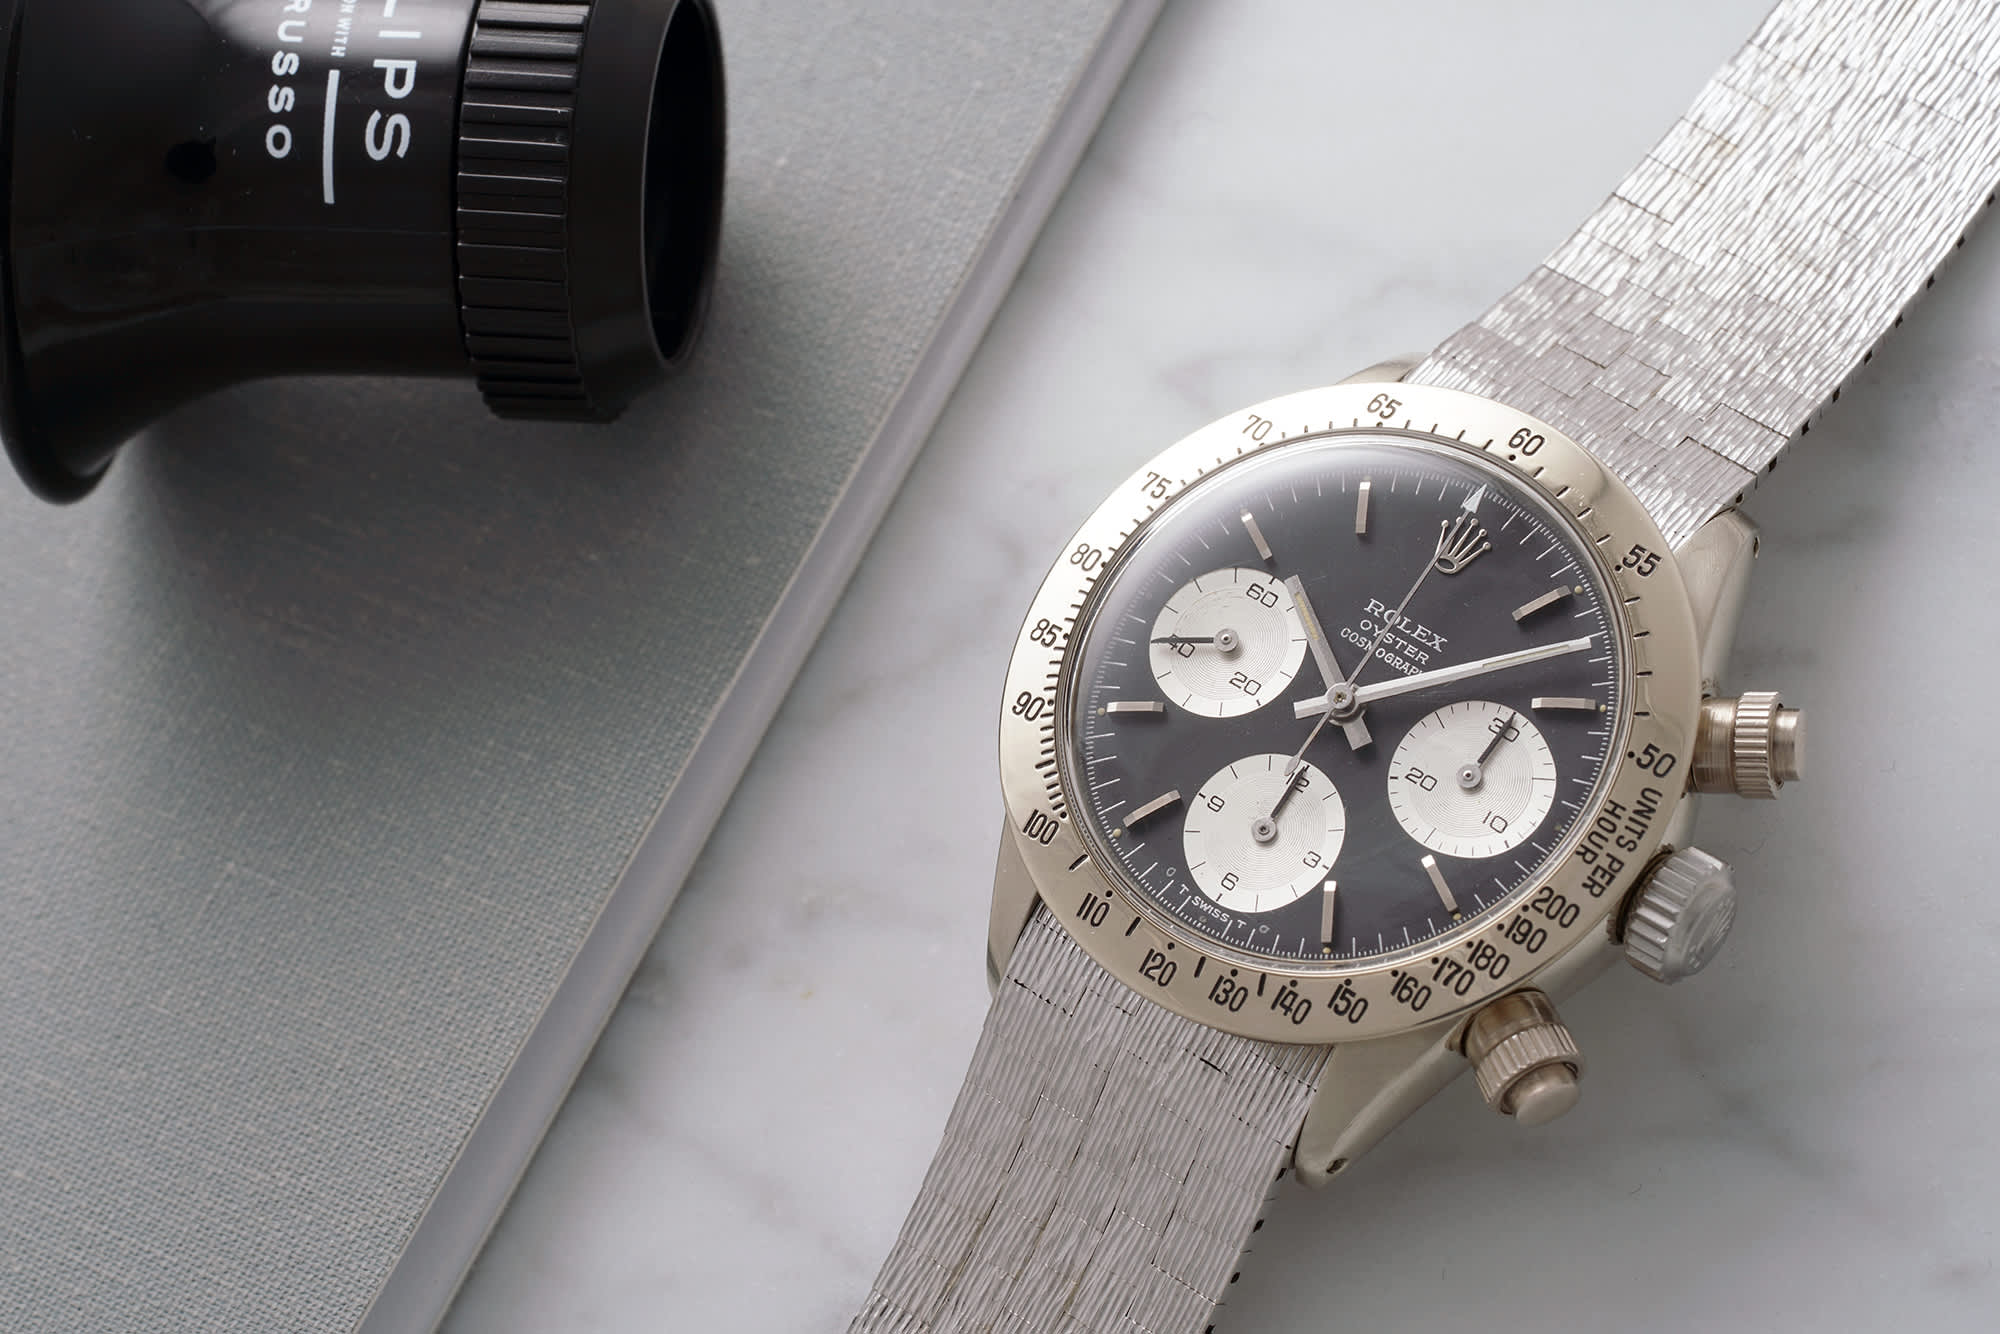 The 'Unicorn' may one of the most expensive Rolexes in the world